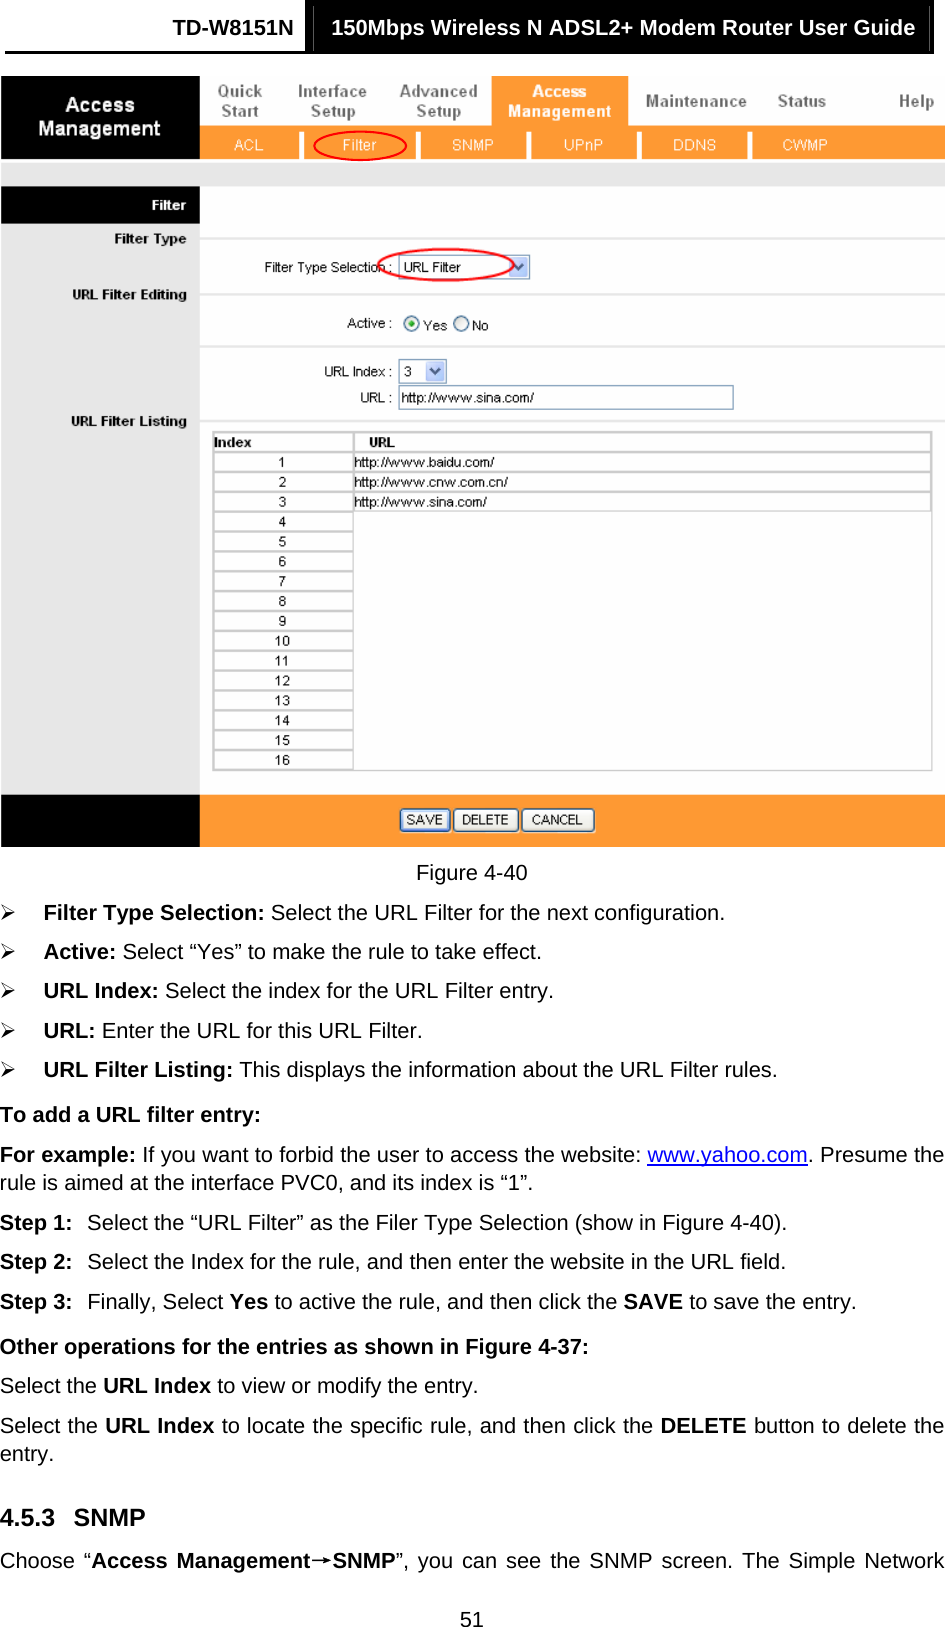 TD-W8151N  150Mbps Wireless N ADSL2+ Modem Router User Guide  51 Figure 4-40 ¾ Filter Type Selection: Select the URL Filter for the next configuration. ¾ Active: Select “Yes” to make the rule to take effect. ¾ URL Index: Select the index for the URL Filter entry. ¾ URL: Enter the URL for this URL Filter. ¾ URL Filter Listing: This displays the information about the URL Filter rules. To add a URL filter entry: For example: If you want to forbid the user to access the website: www.yahoo.com. Presume the rule is aimed at the interface PVC0, and its index is “1”. Step 1:  Select the “URL Filter” as the Filer Type Selection (show in Figure 4-40). Step 2:  Select the Index for the rule, and then enter the website in the URL field. Step 3:  Finally, Select Yes to active the rule, and then click the SAVE to save the entry. Other operations for the entries as shown in Figure 4-37: Select the URL Index to view or modify the entry. Select the URL Index to locate the specific rule, and then click the DELETE button to delete the entry. 4.5.3  SNMP Choose “Access Management→SNMP”, you can see the SNMP screen. The Simple Network 